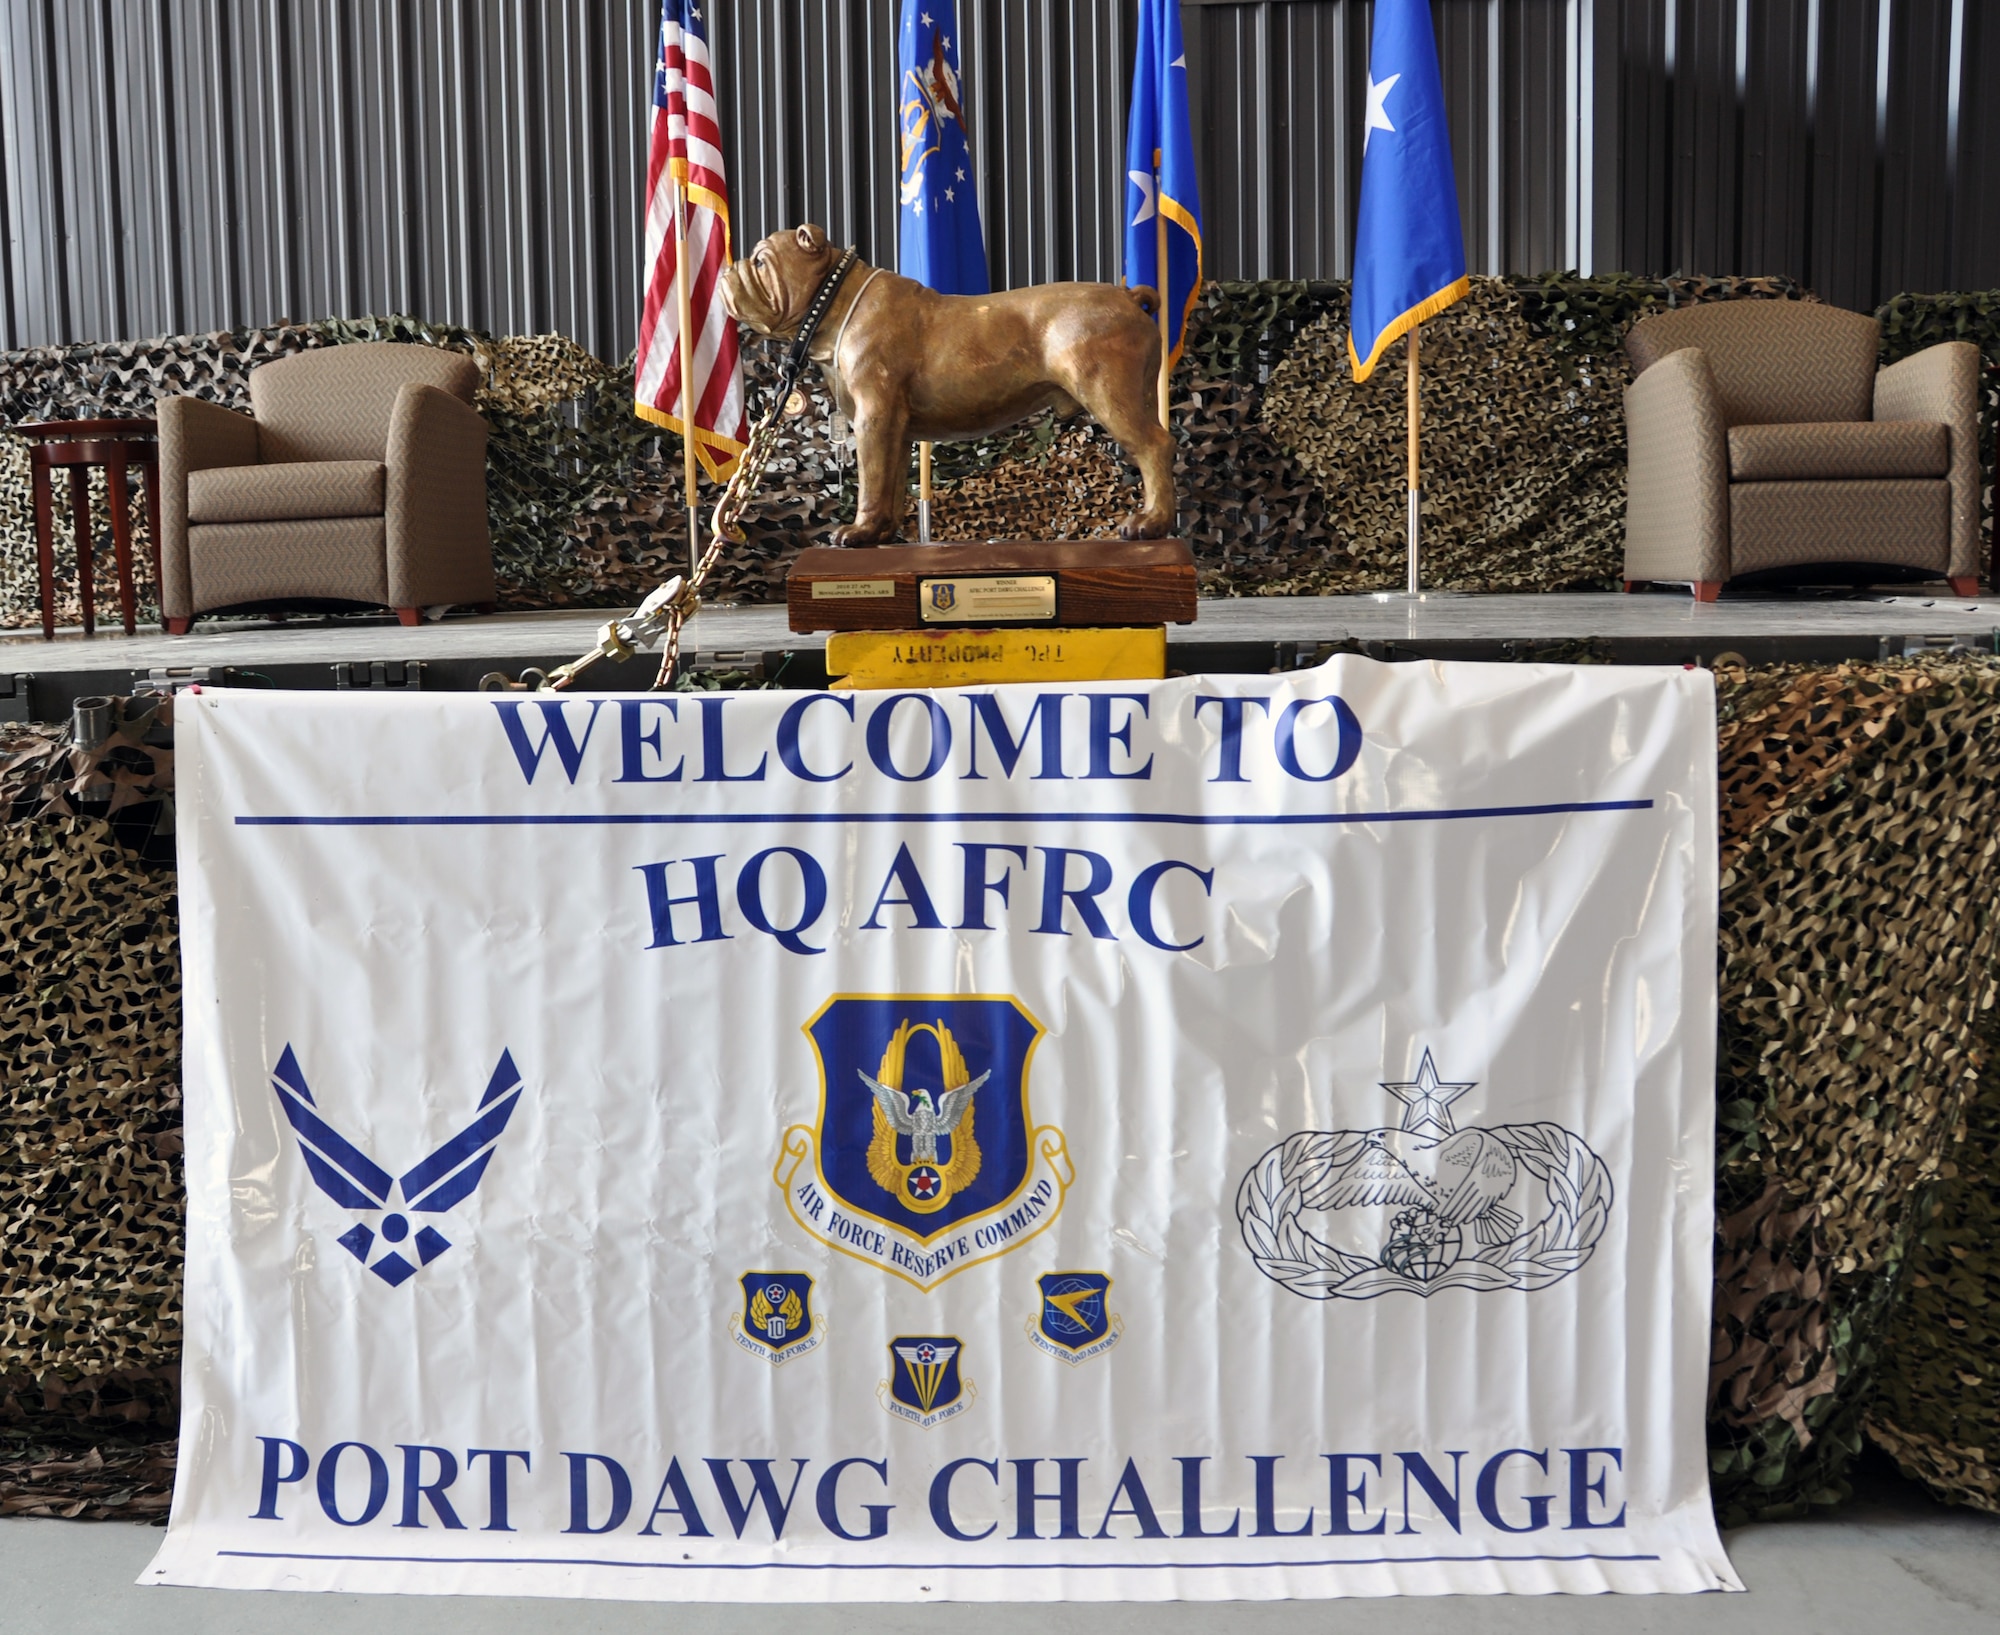 Nineteen teams representing some of the Air Force Reserve Command's Aerial Port Squadrons, or "Port Dawgs," are going toe-to-toe June 19-21 in this biennium's "Port Dawg Challenge" at the Transportation Proficiency Center, here. Teams compete in various challenges to showcase their capabilities as aerial porters. (U.S. Air Force photo/Senior Airman Elizabeth Gaston)